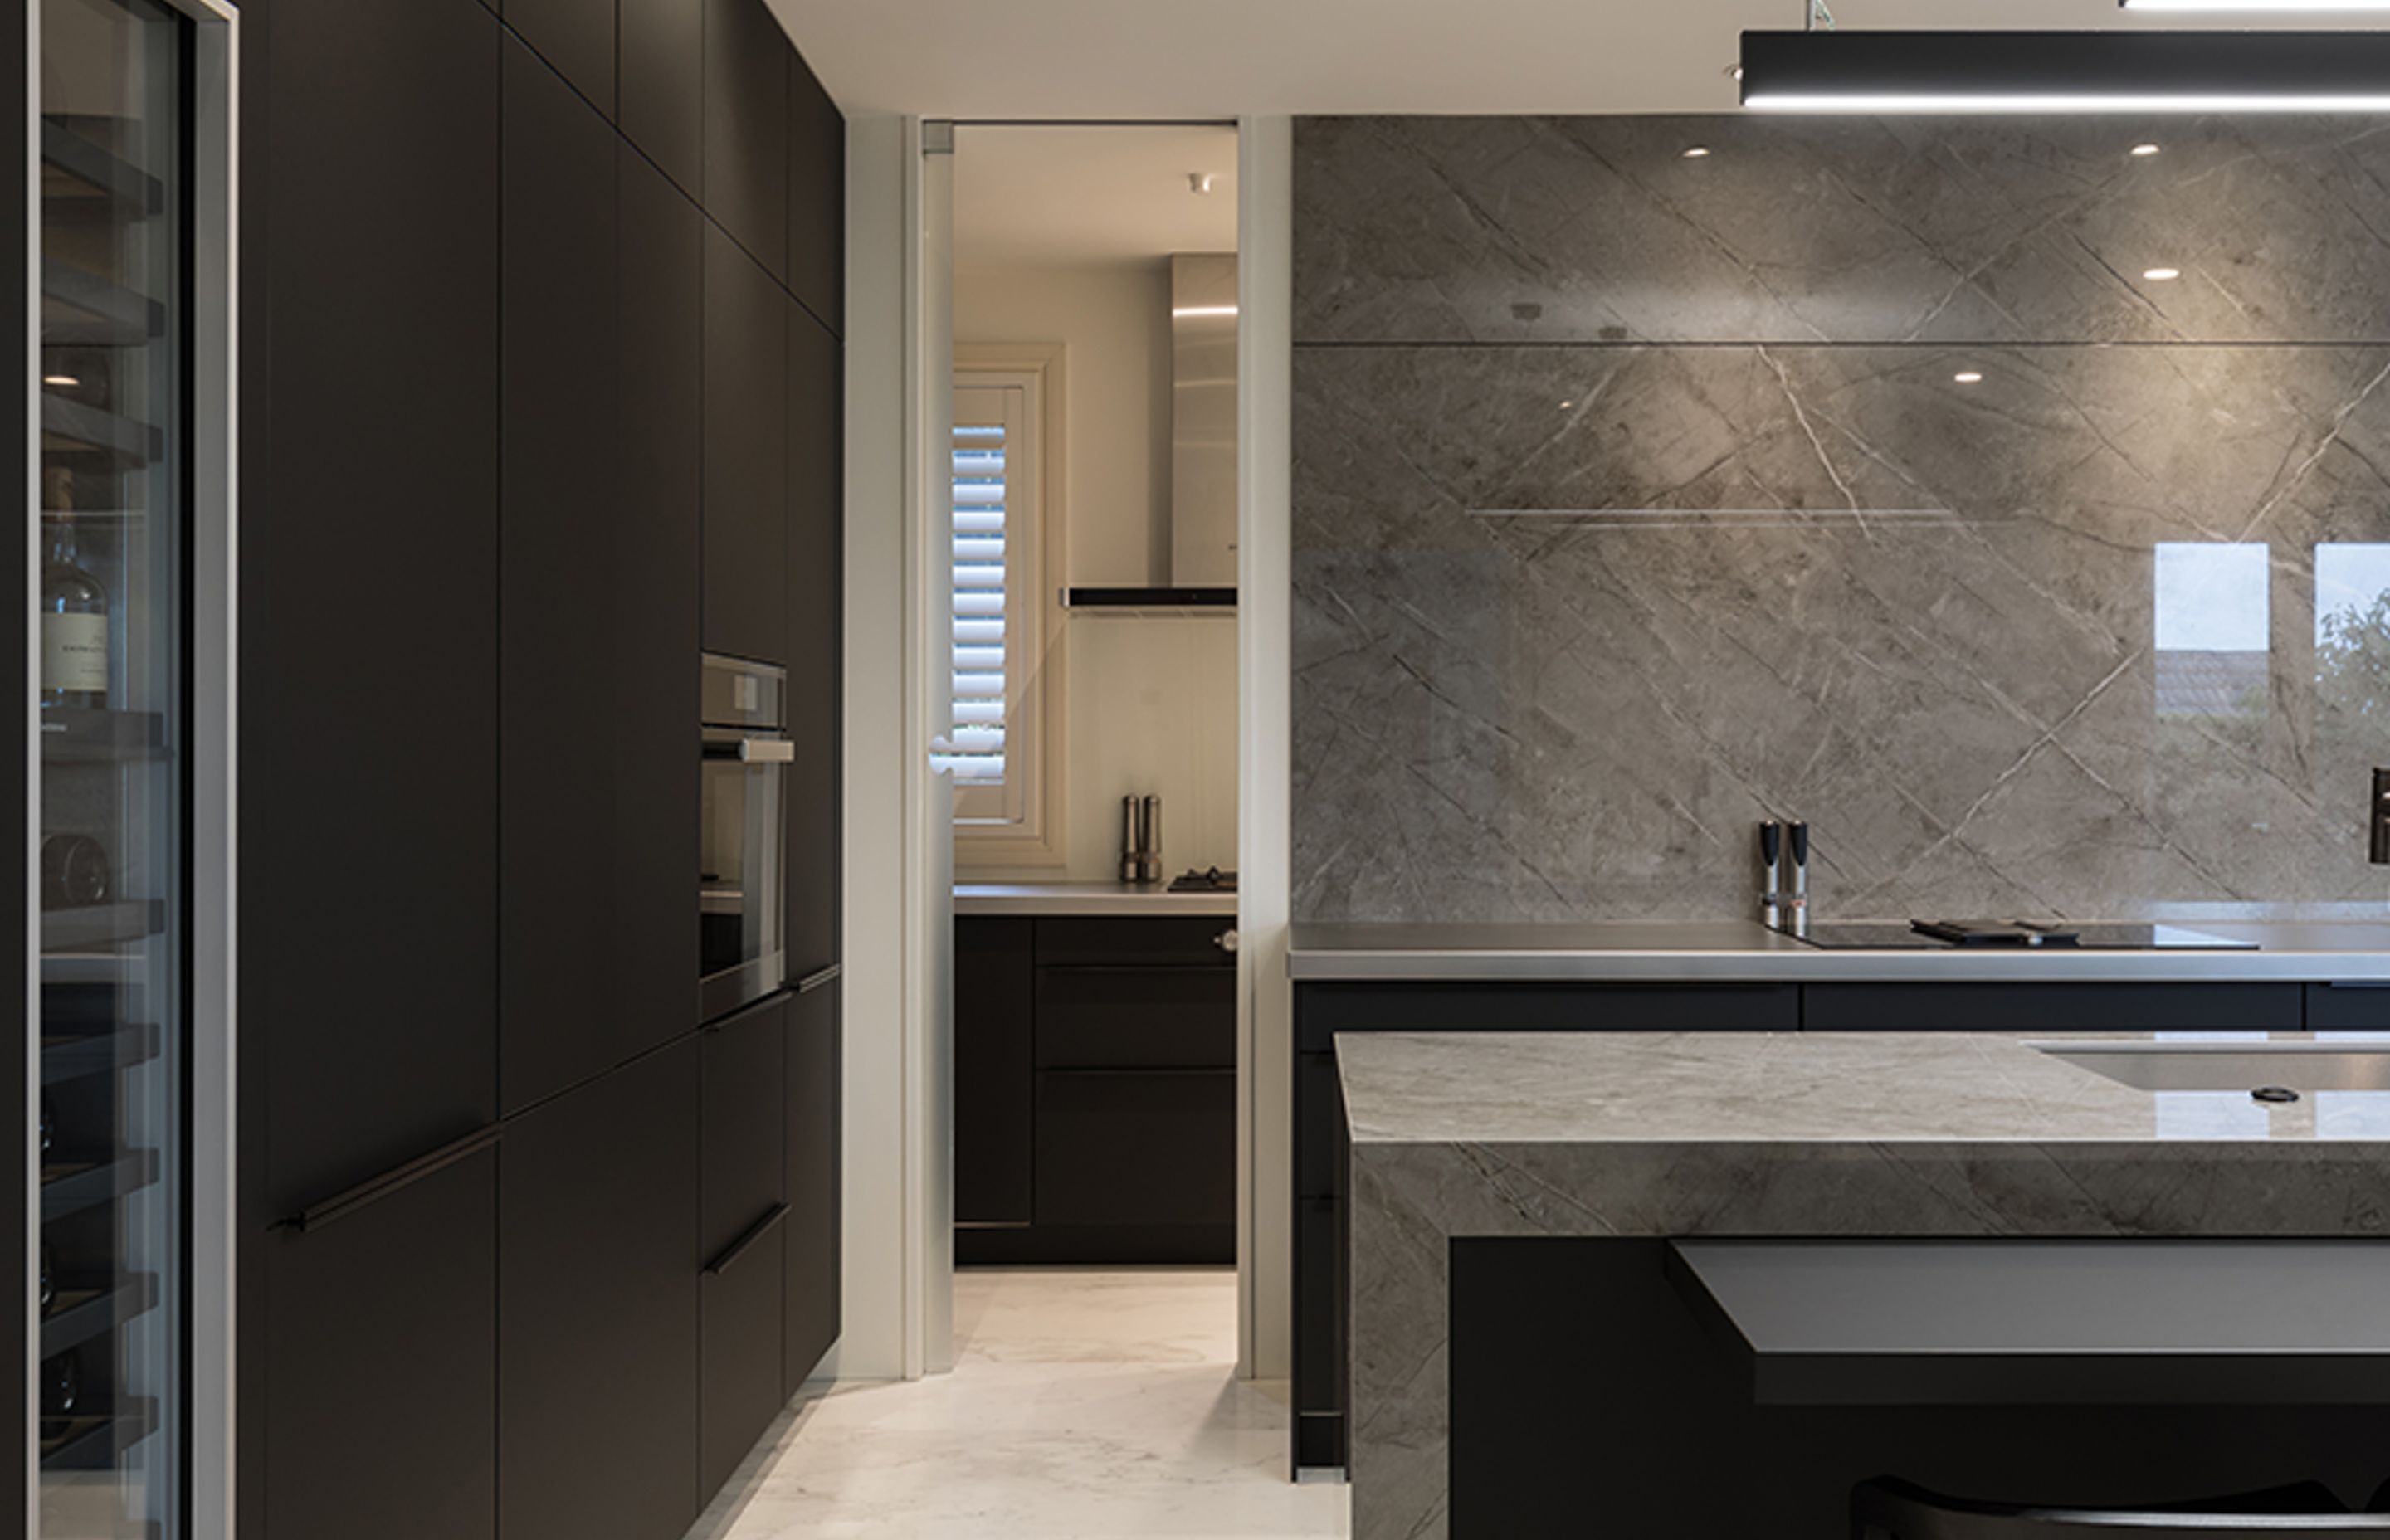 Tone-on-tone surfaces impart a sleek, sophisticated feel to the kitchen space, while the inclusion of a scullery means all the day-to-day minutiae is hidden behind doors.